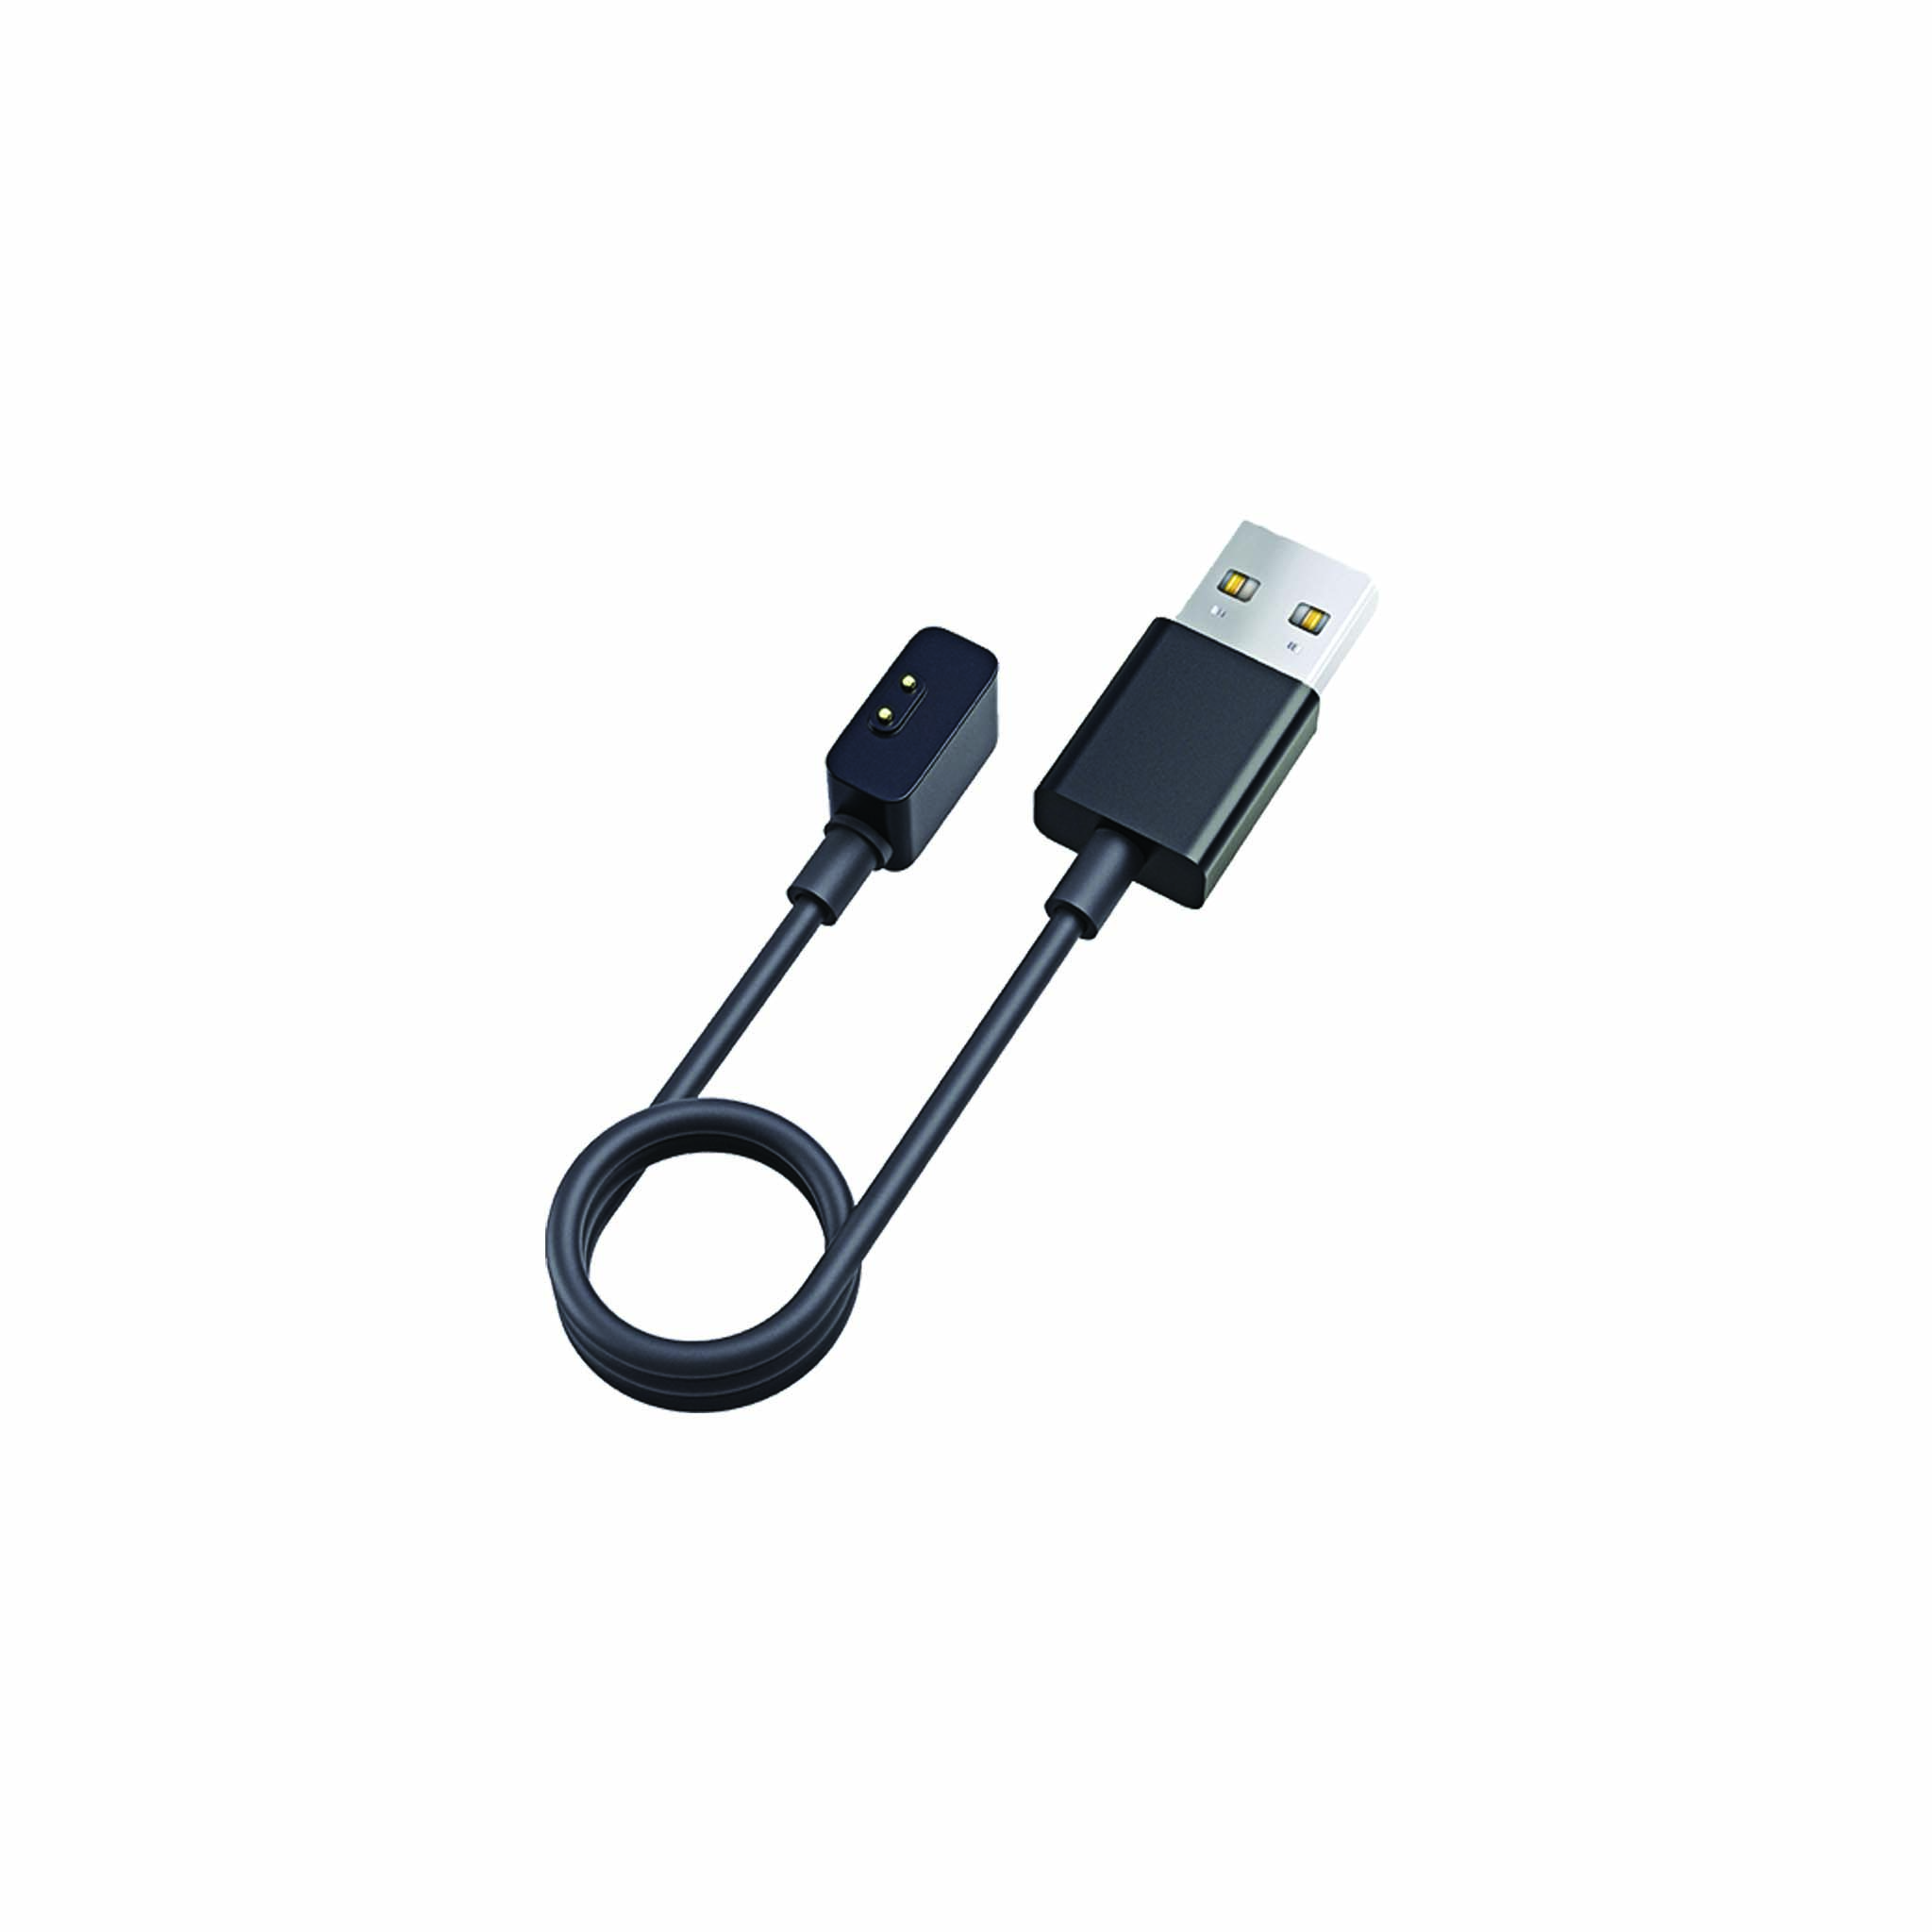 Redmi Watch 3 Charger